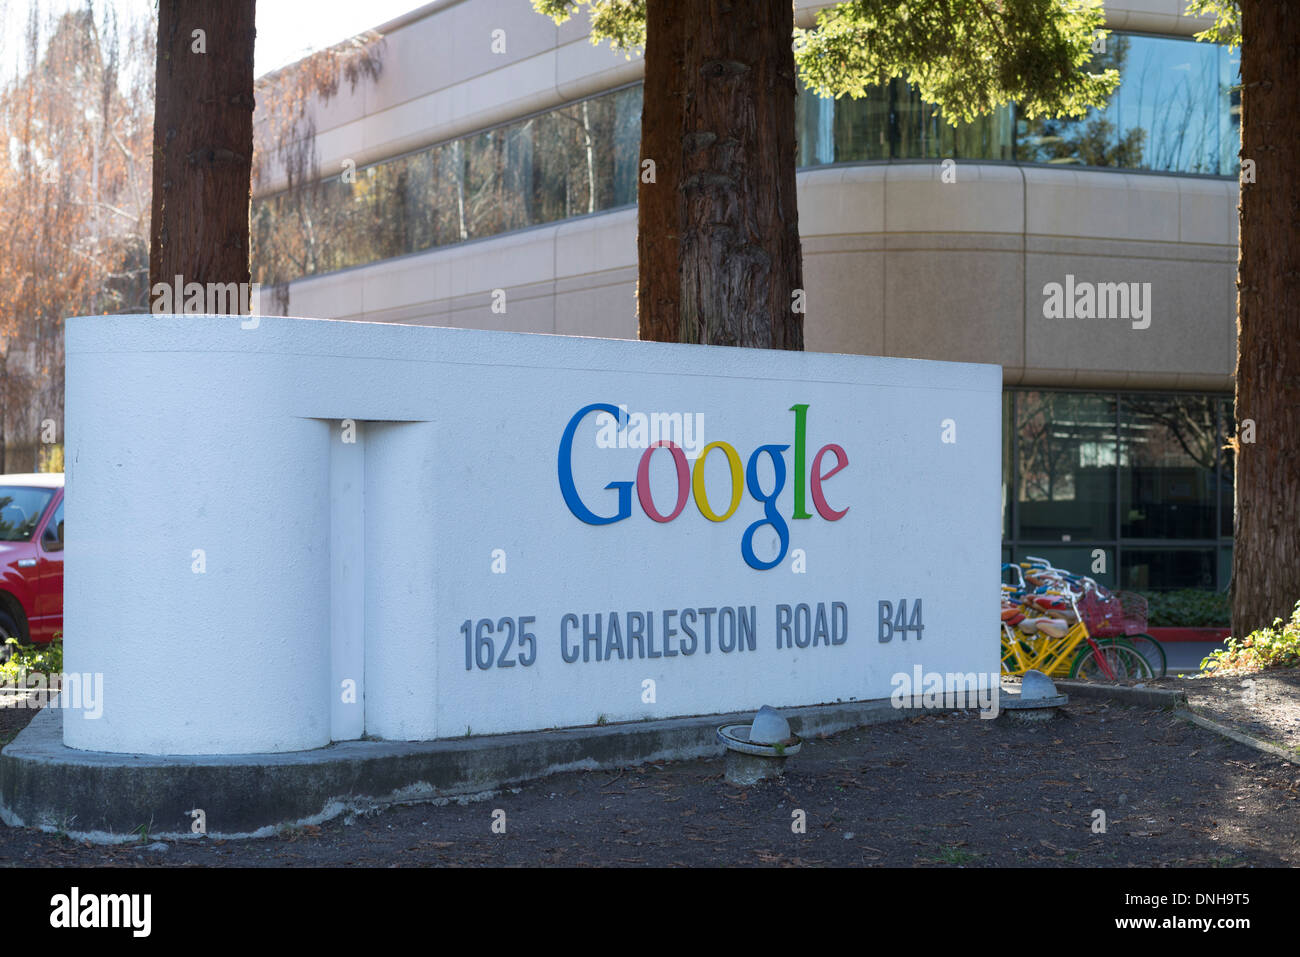 Google sign on Google's Mountain View campus. Stock Photo